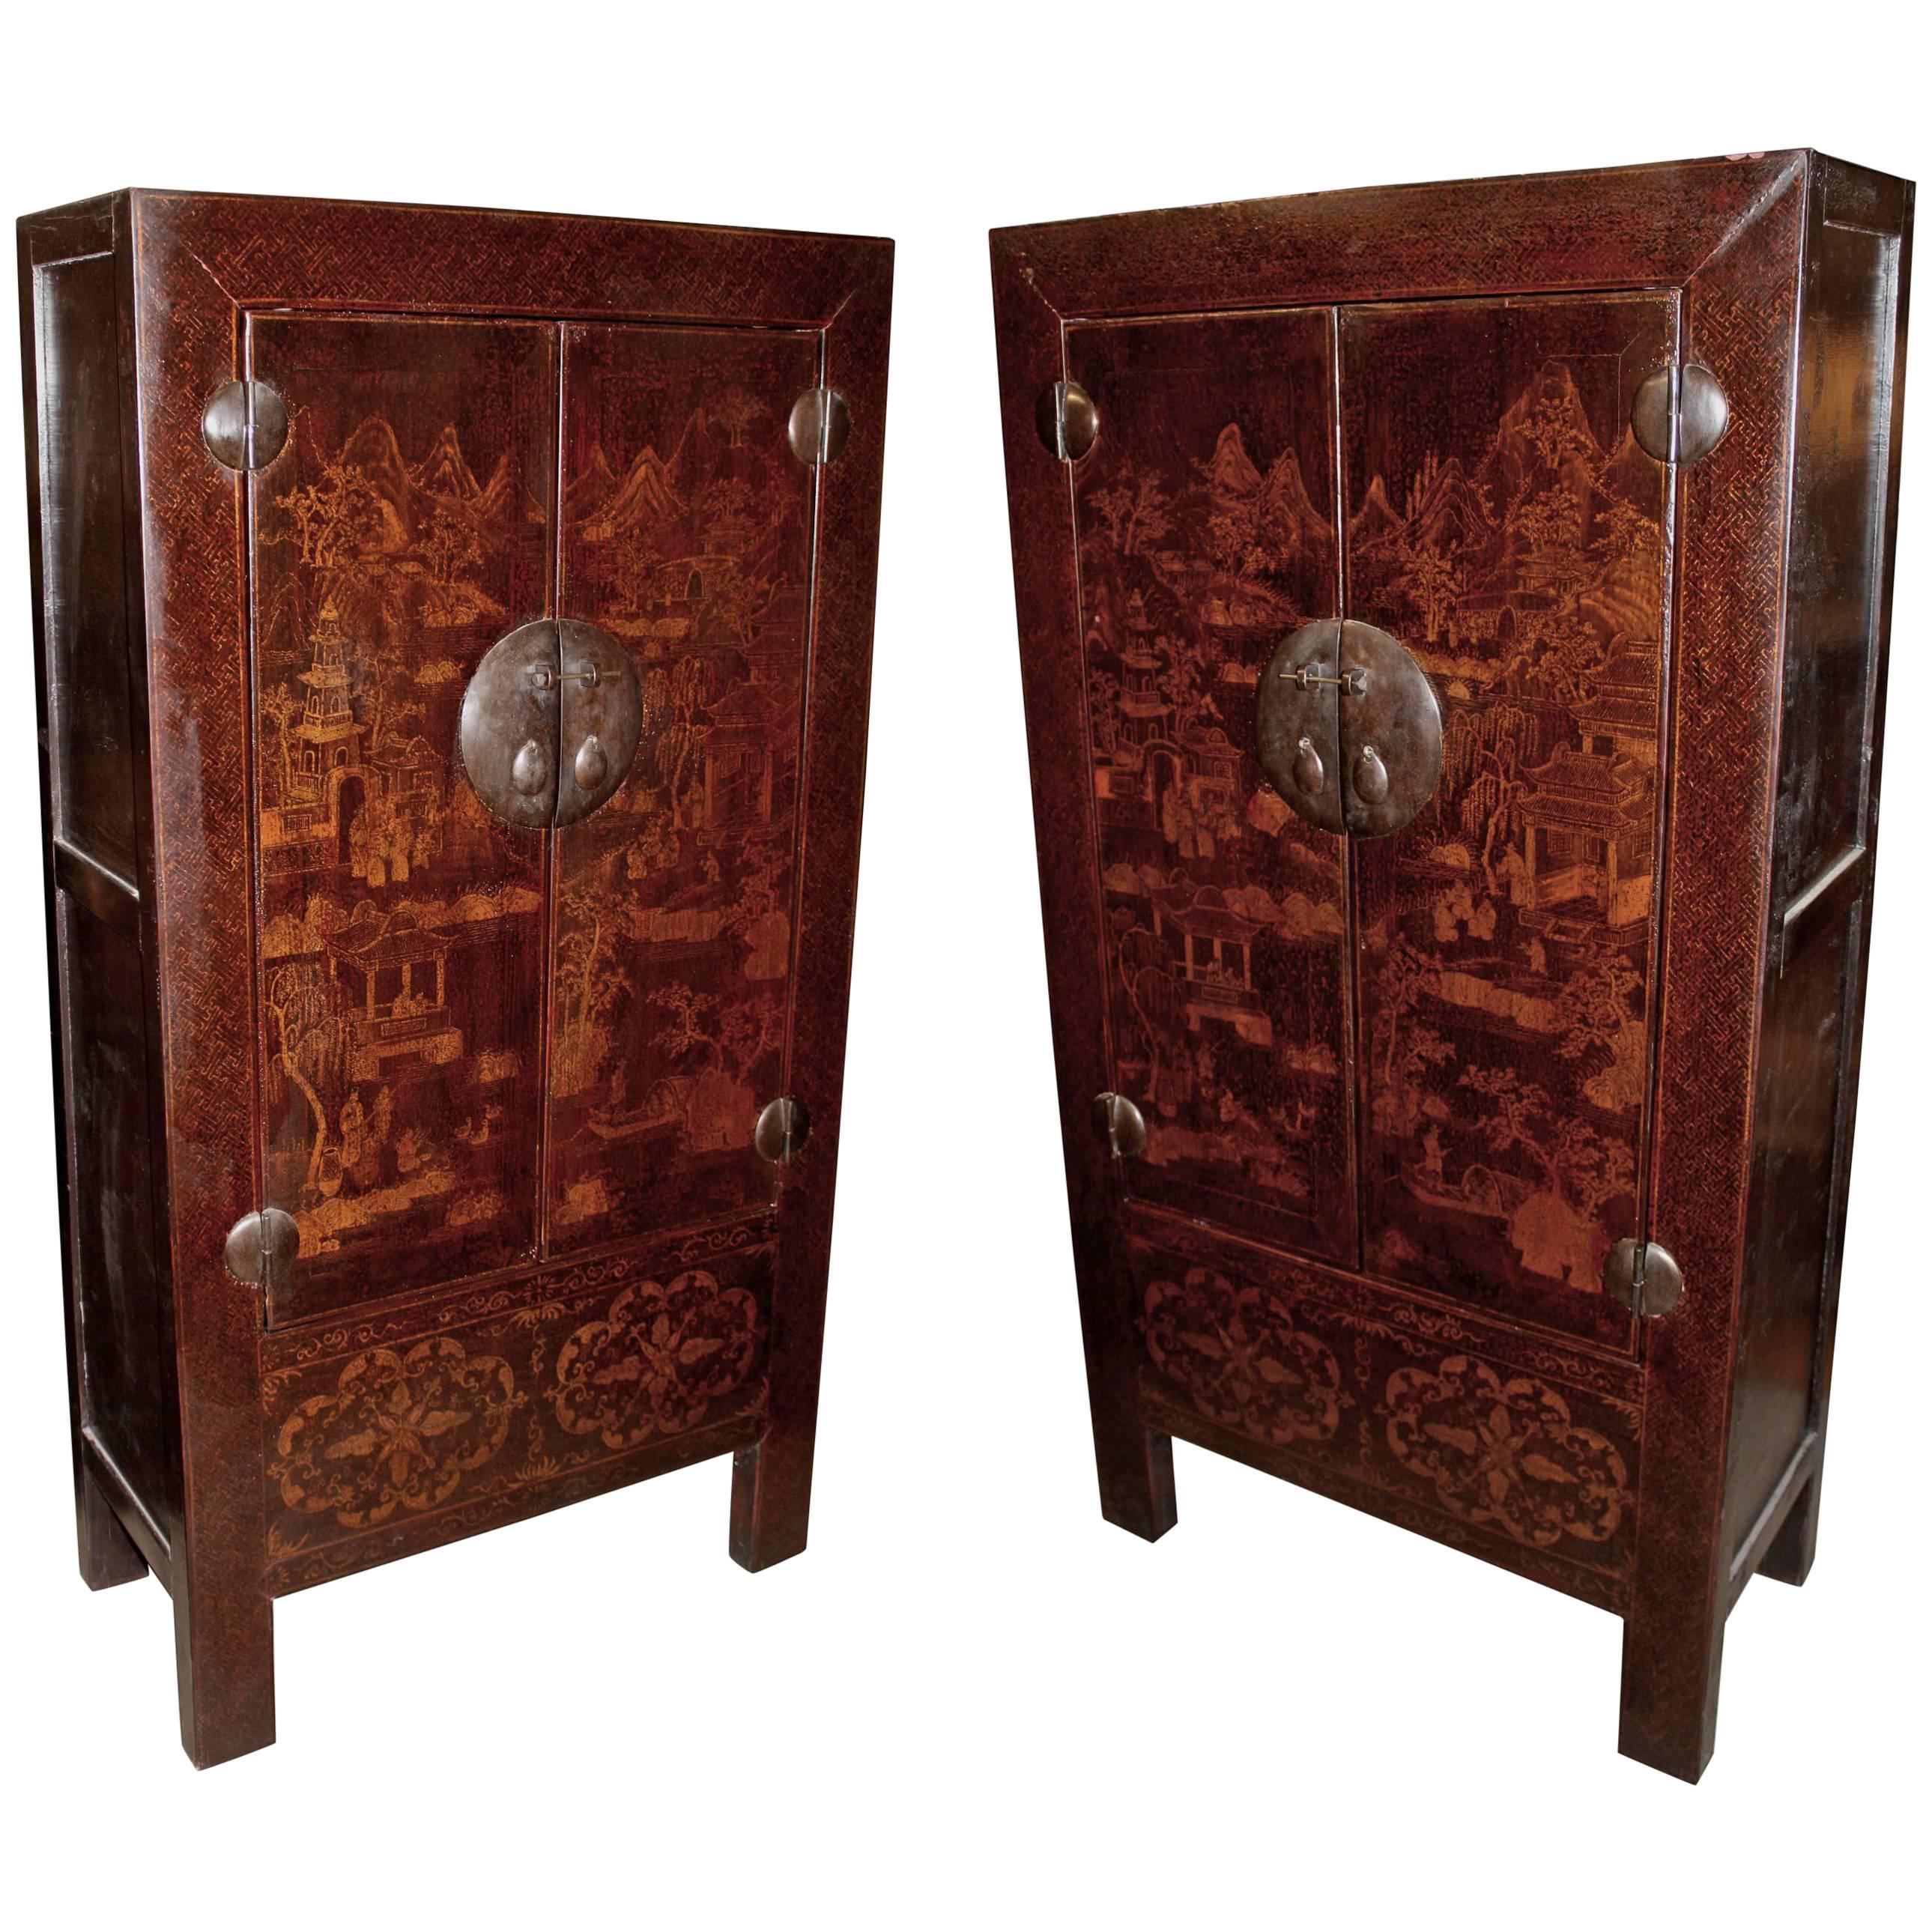 Pair of Late 19th Century Chinese Elmwood Cabinets